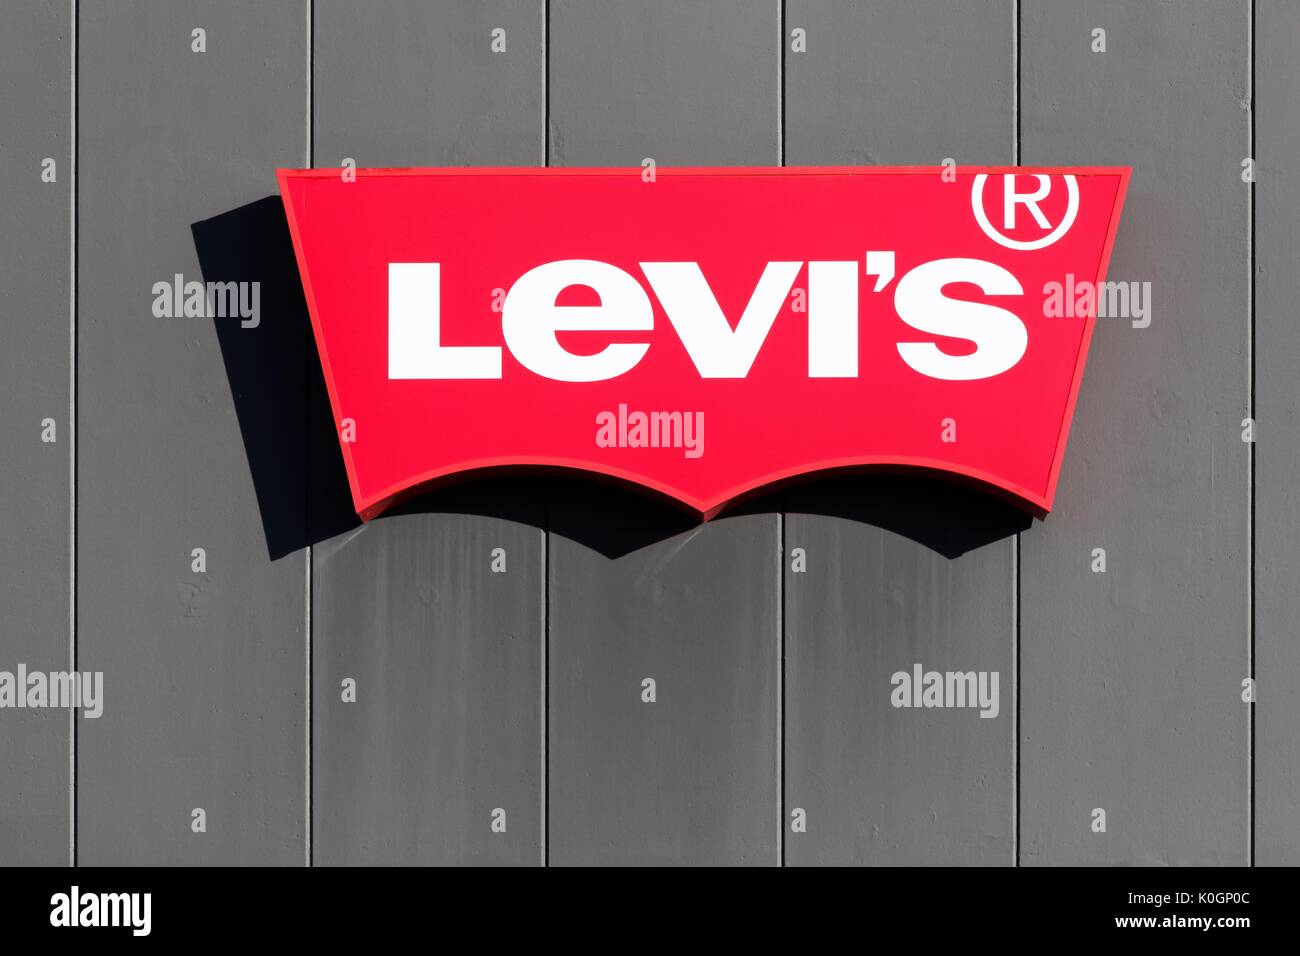 Merignac, France - June 5, 2017: Levi Strauss is a privately held American clothing company known worldwide for its Levi's  brand of denim jeans Stock Photo